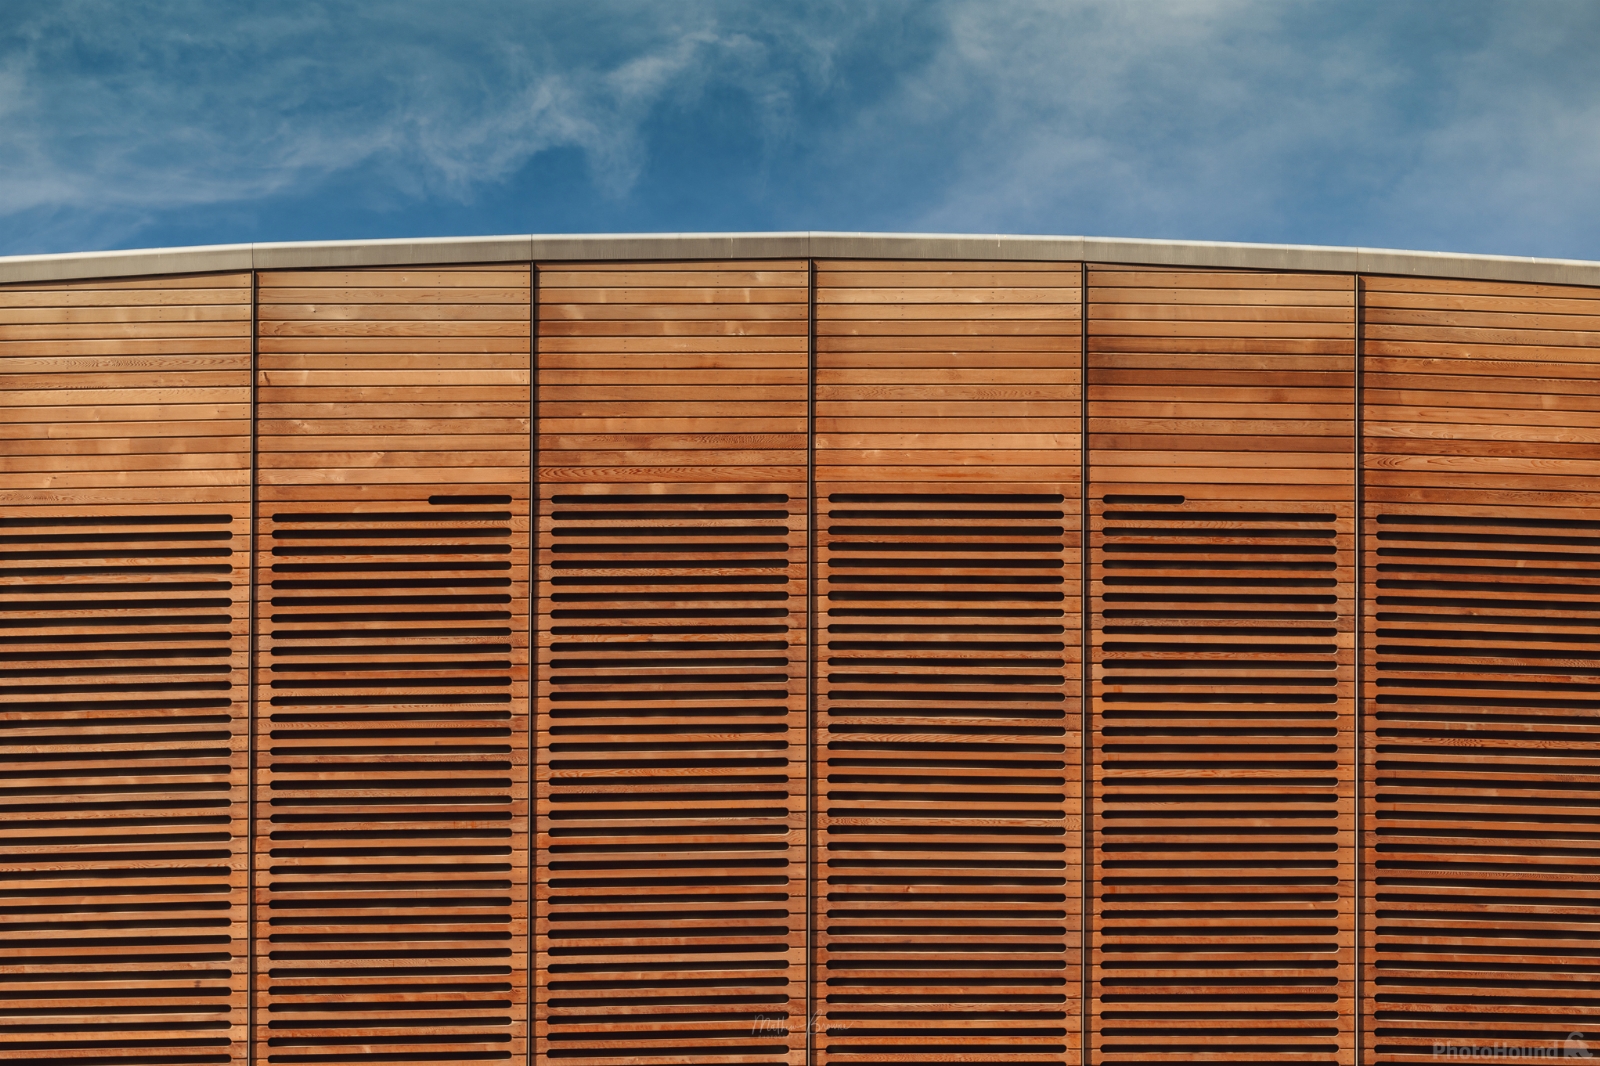 Image of Lee Valley VeloPark by Mathew Browne